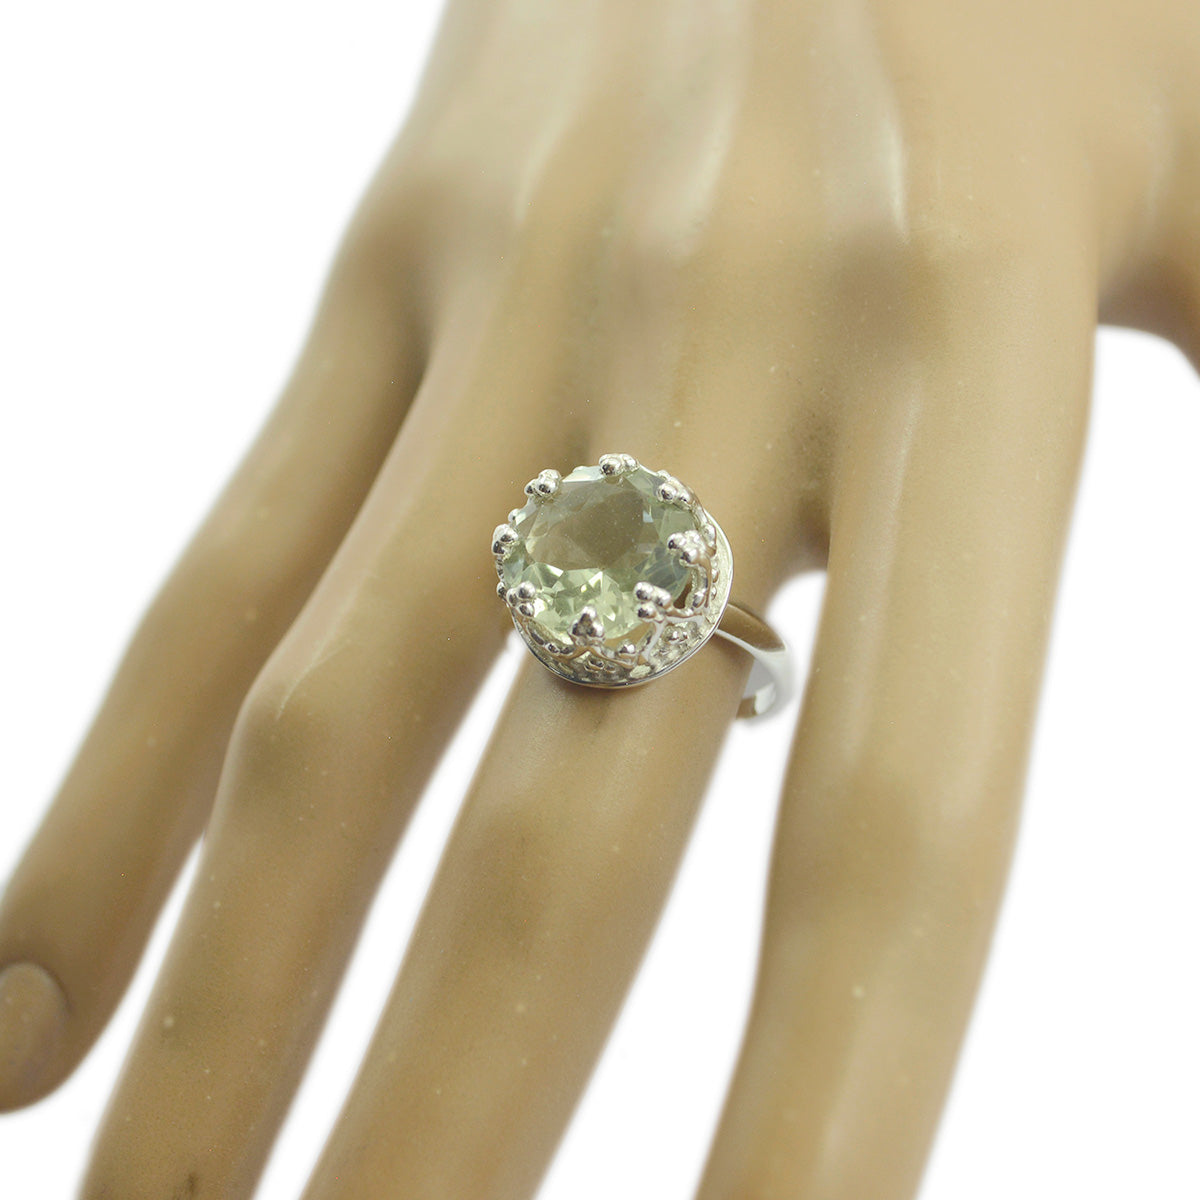 Taking Gemstone Green Amethyst Solid Silver Rings High End Jewelry